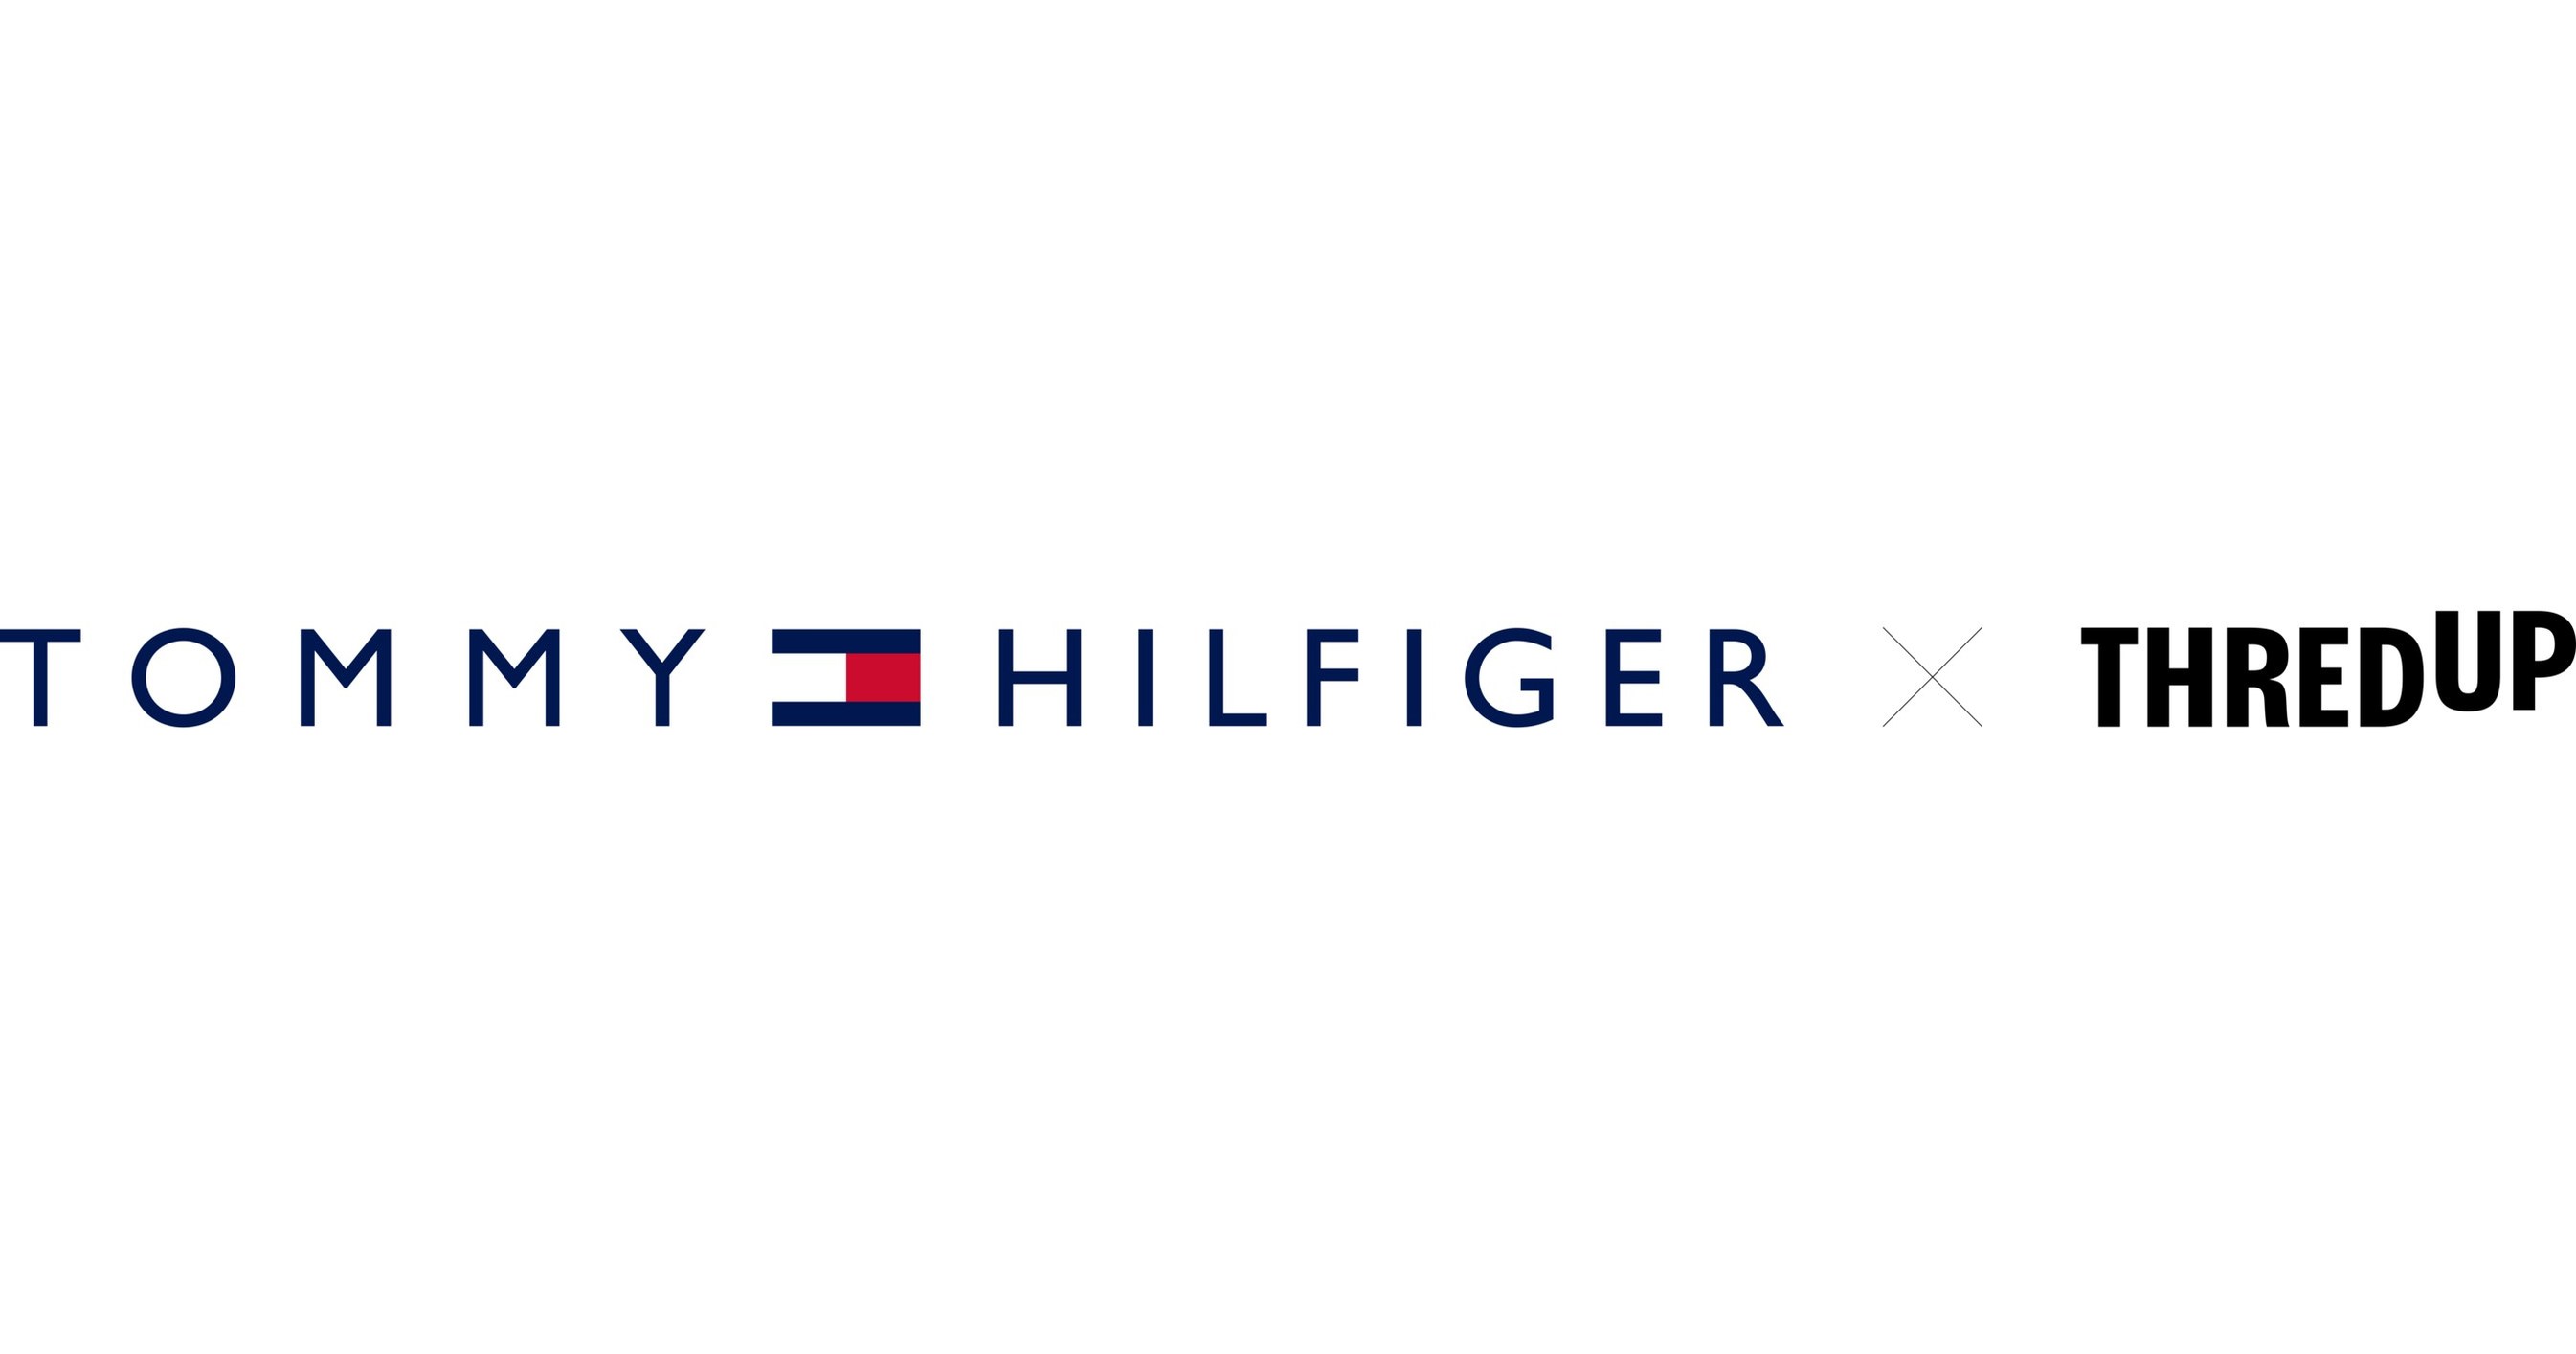 Tommy Hilfiger and thredUP Forces to Resale Program in the United States